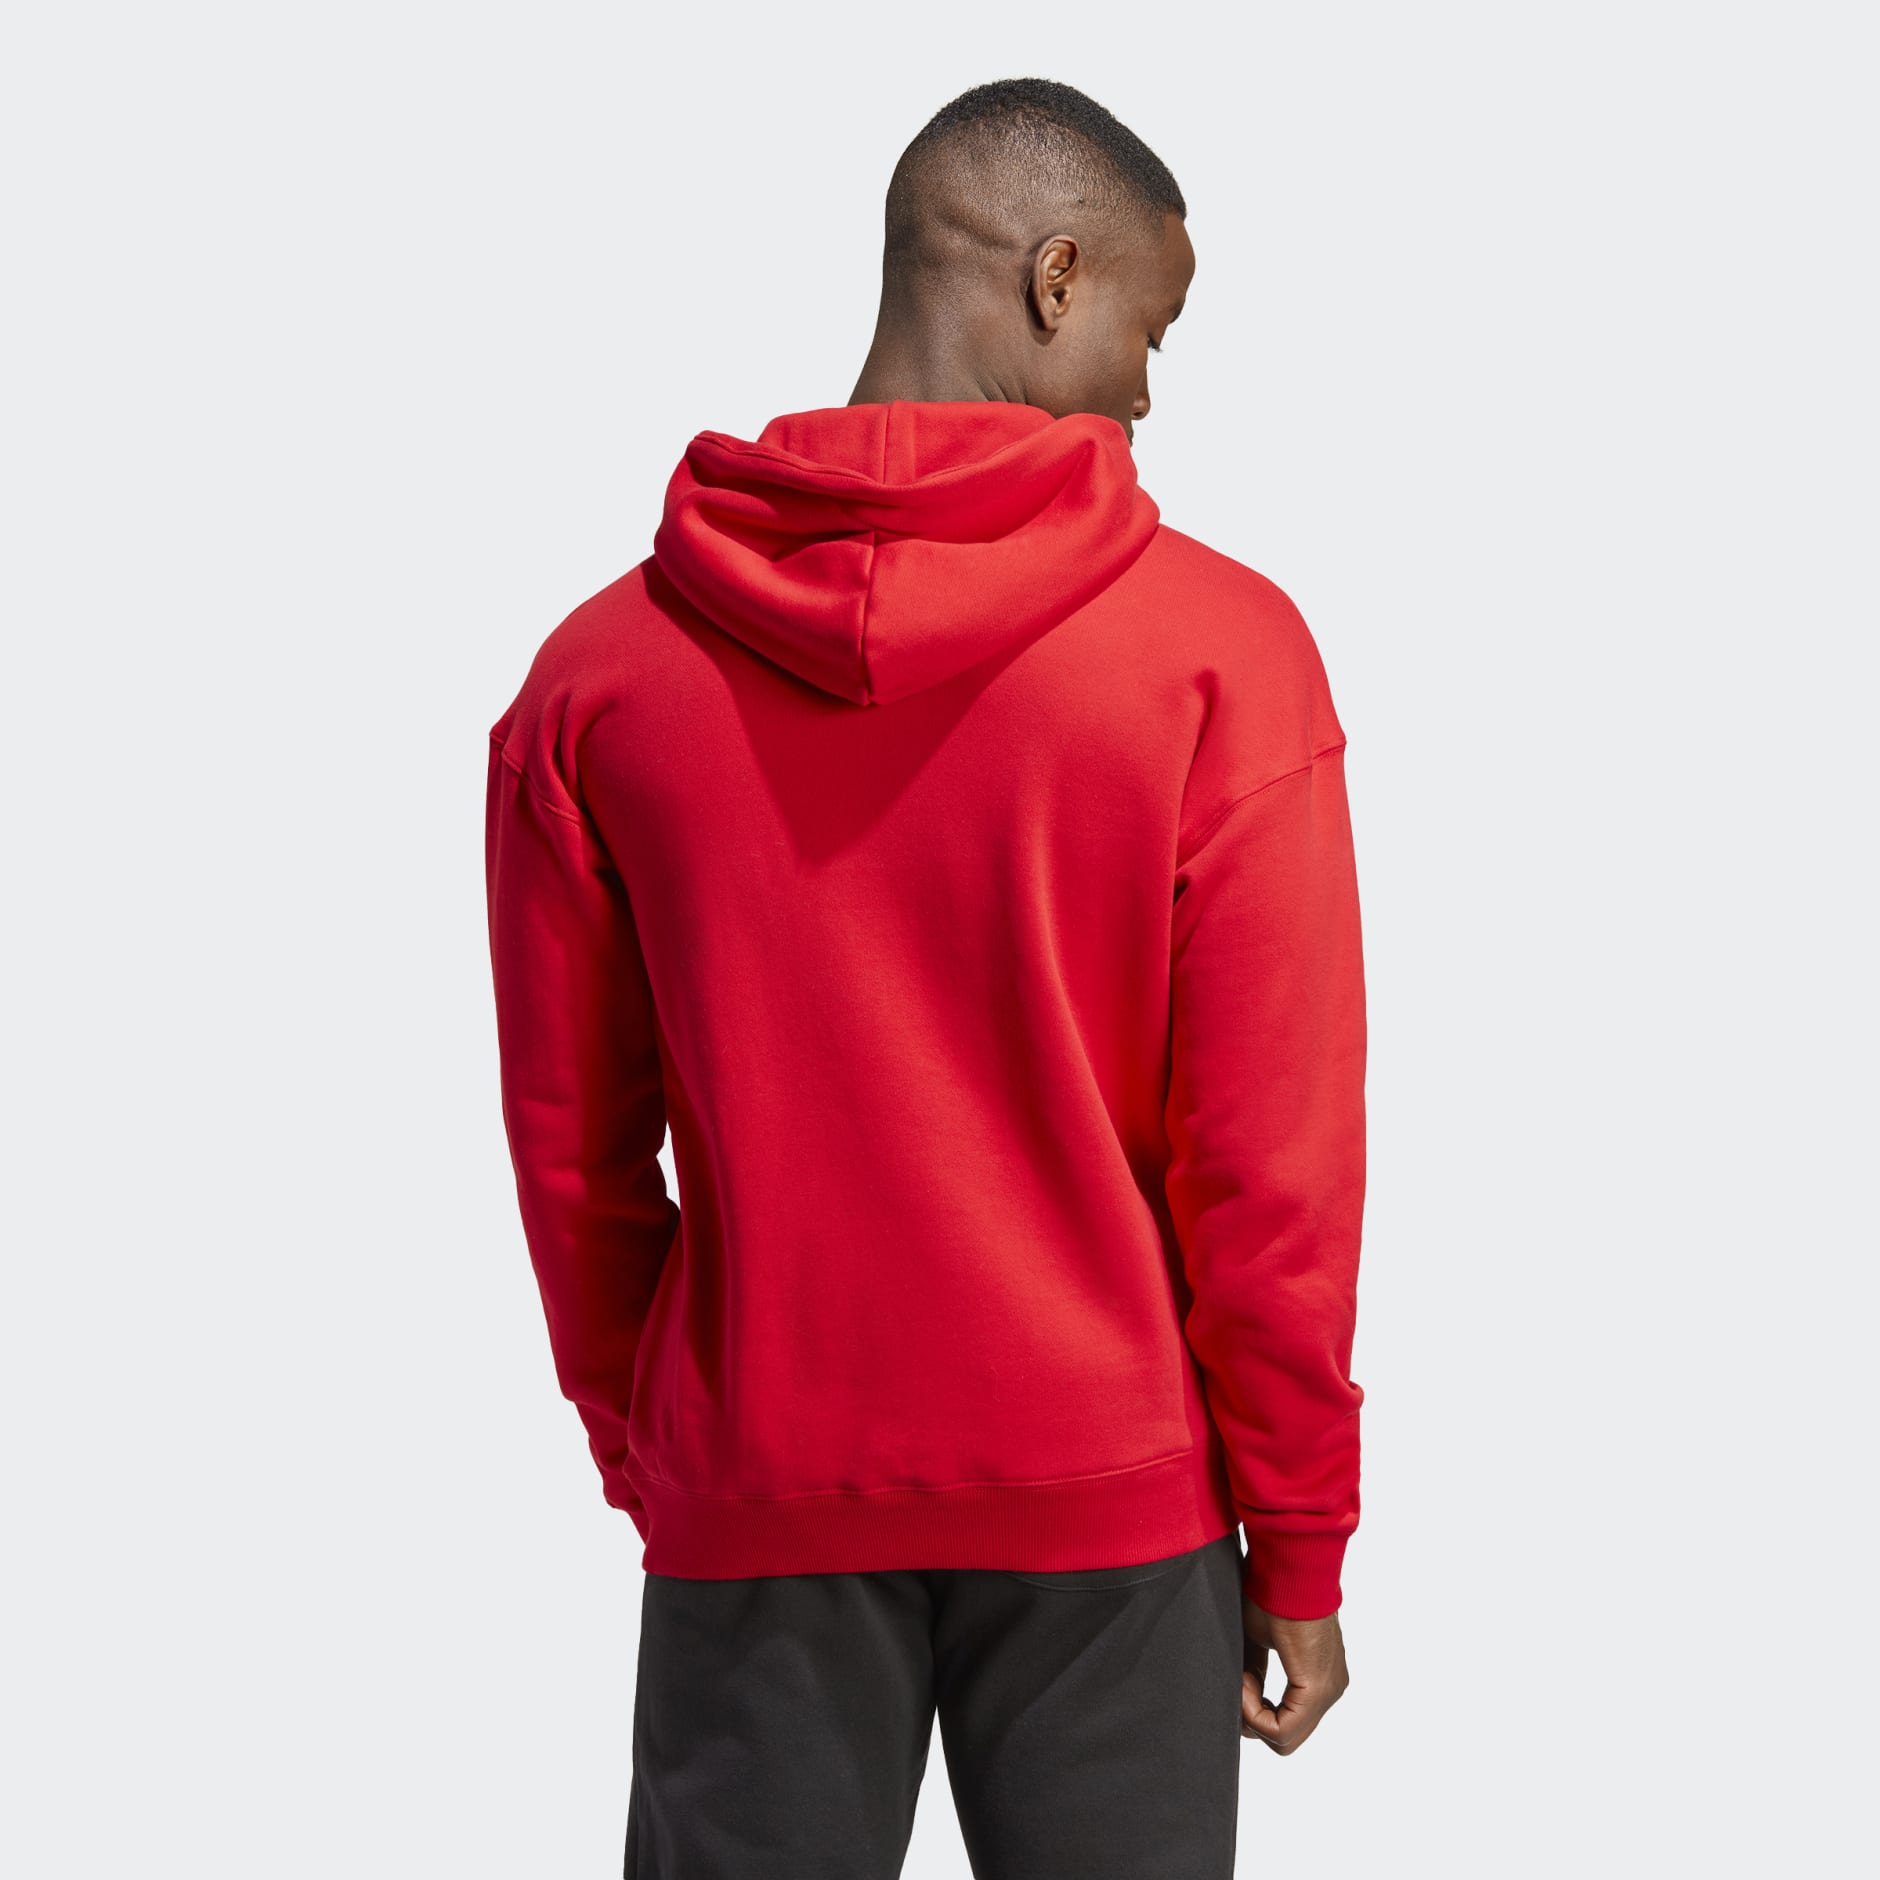 Men's Clothing - Manchester United Chinese Story Hoodie - Red | adidas ...